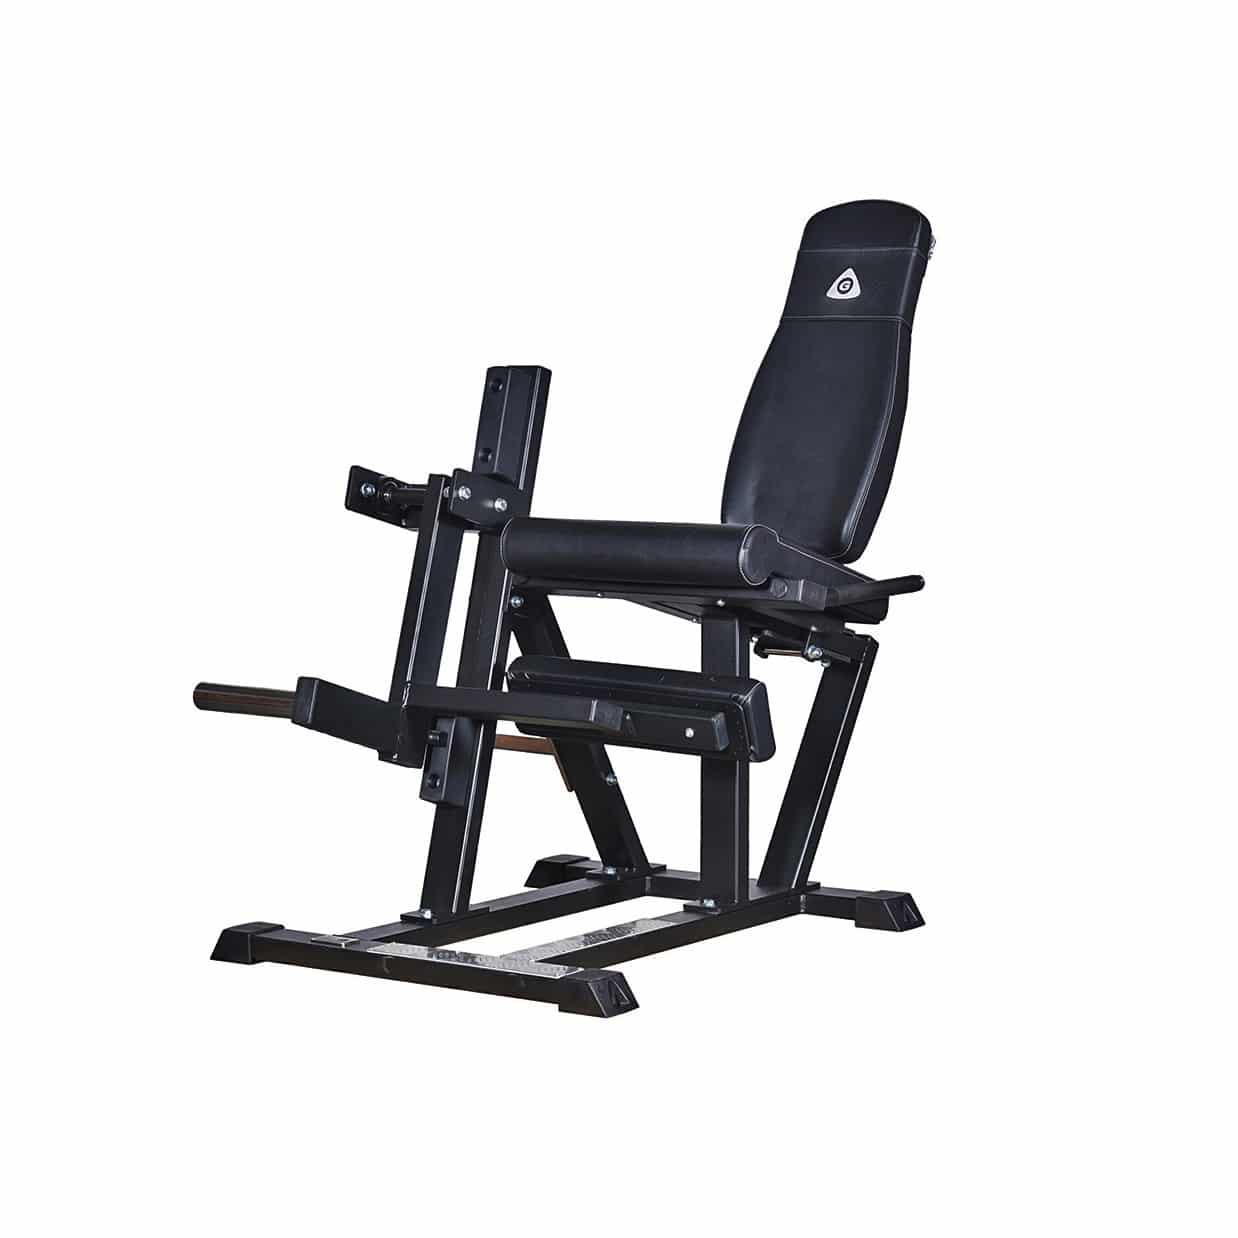 leg extension gym machine from gymleco, product picture with white background